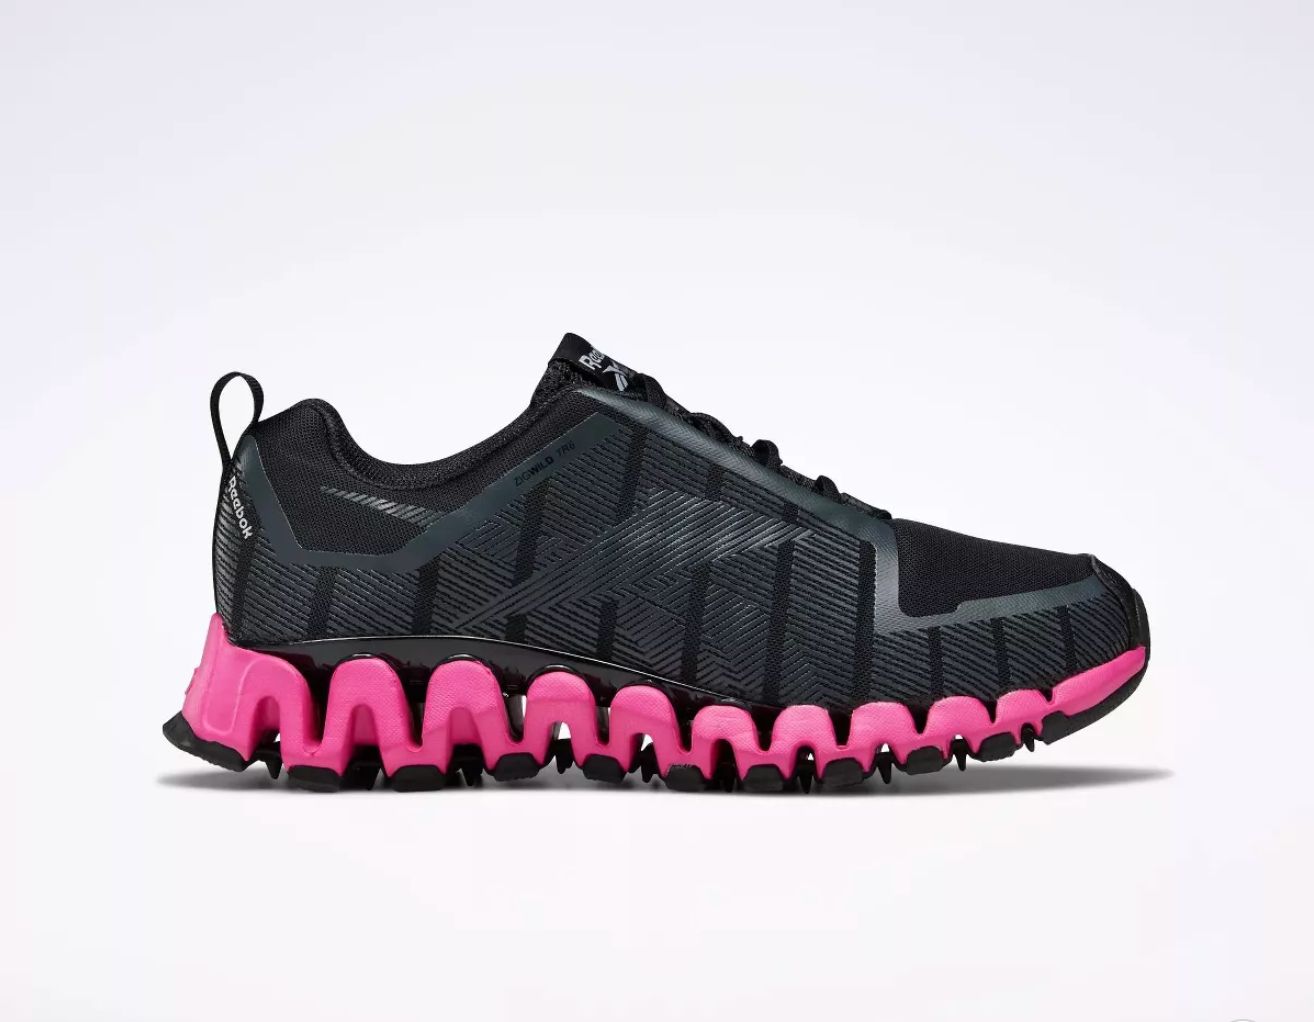 A black sneaker with a pink sole